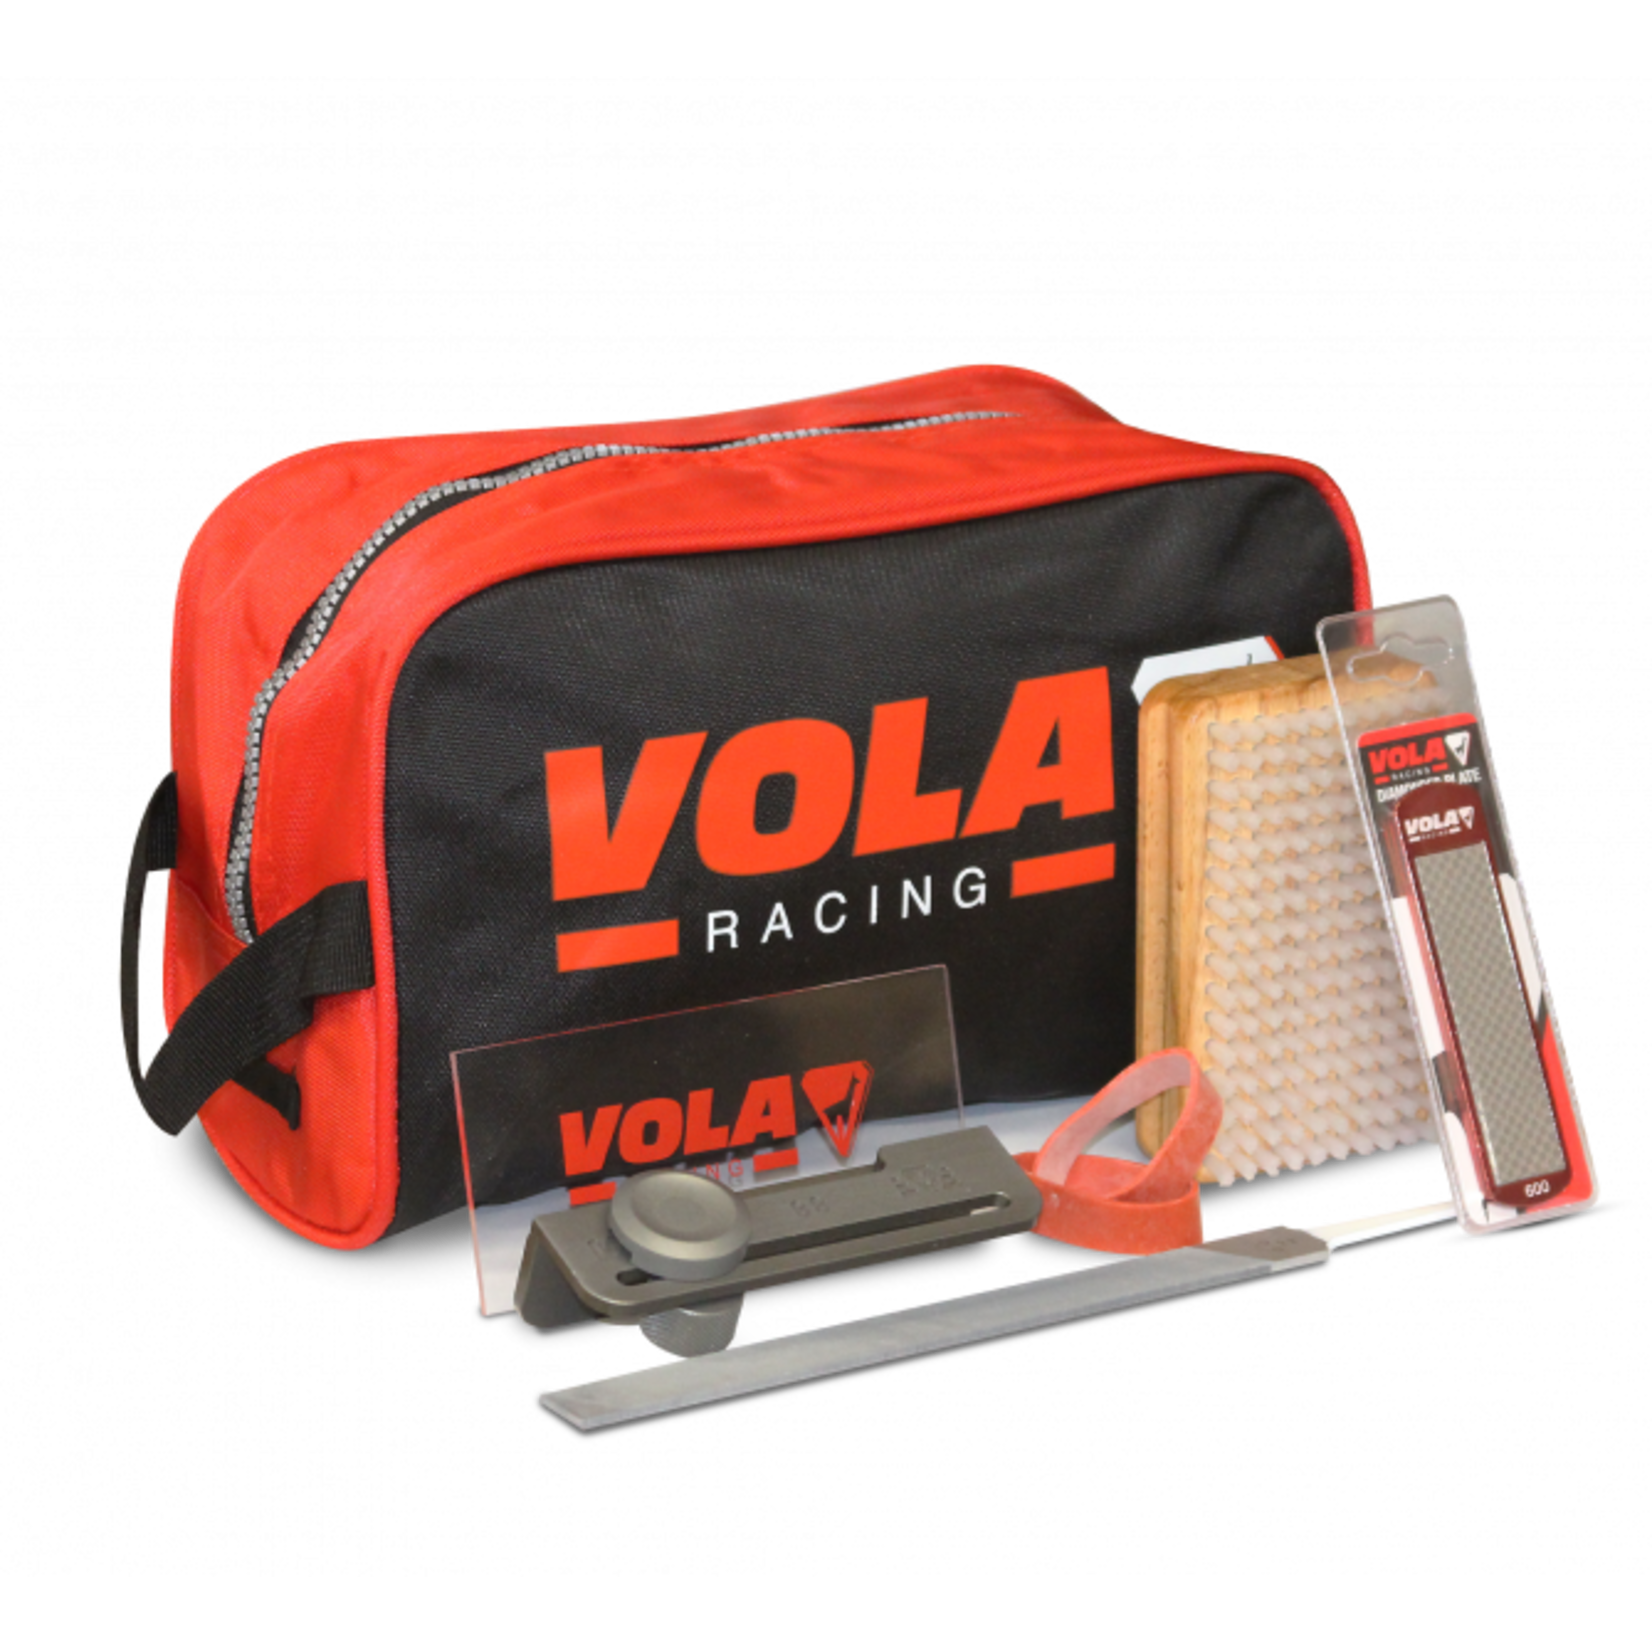 Vola Vola Tuning Kit Package